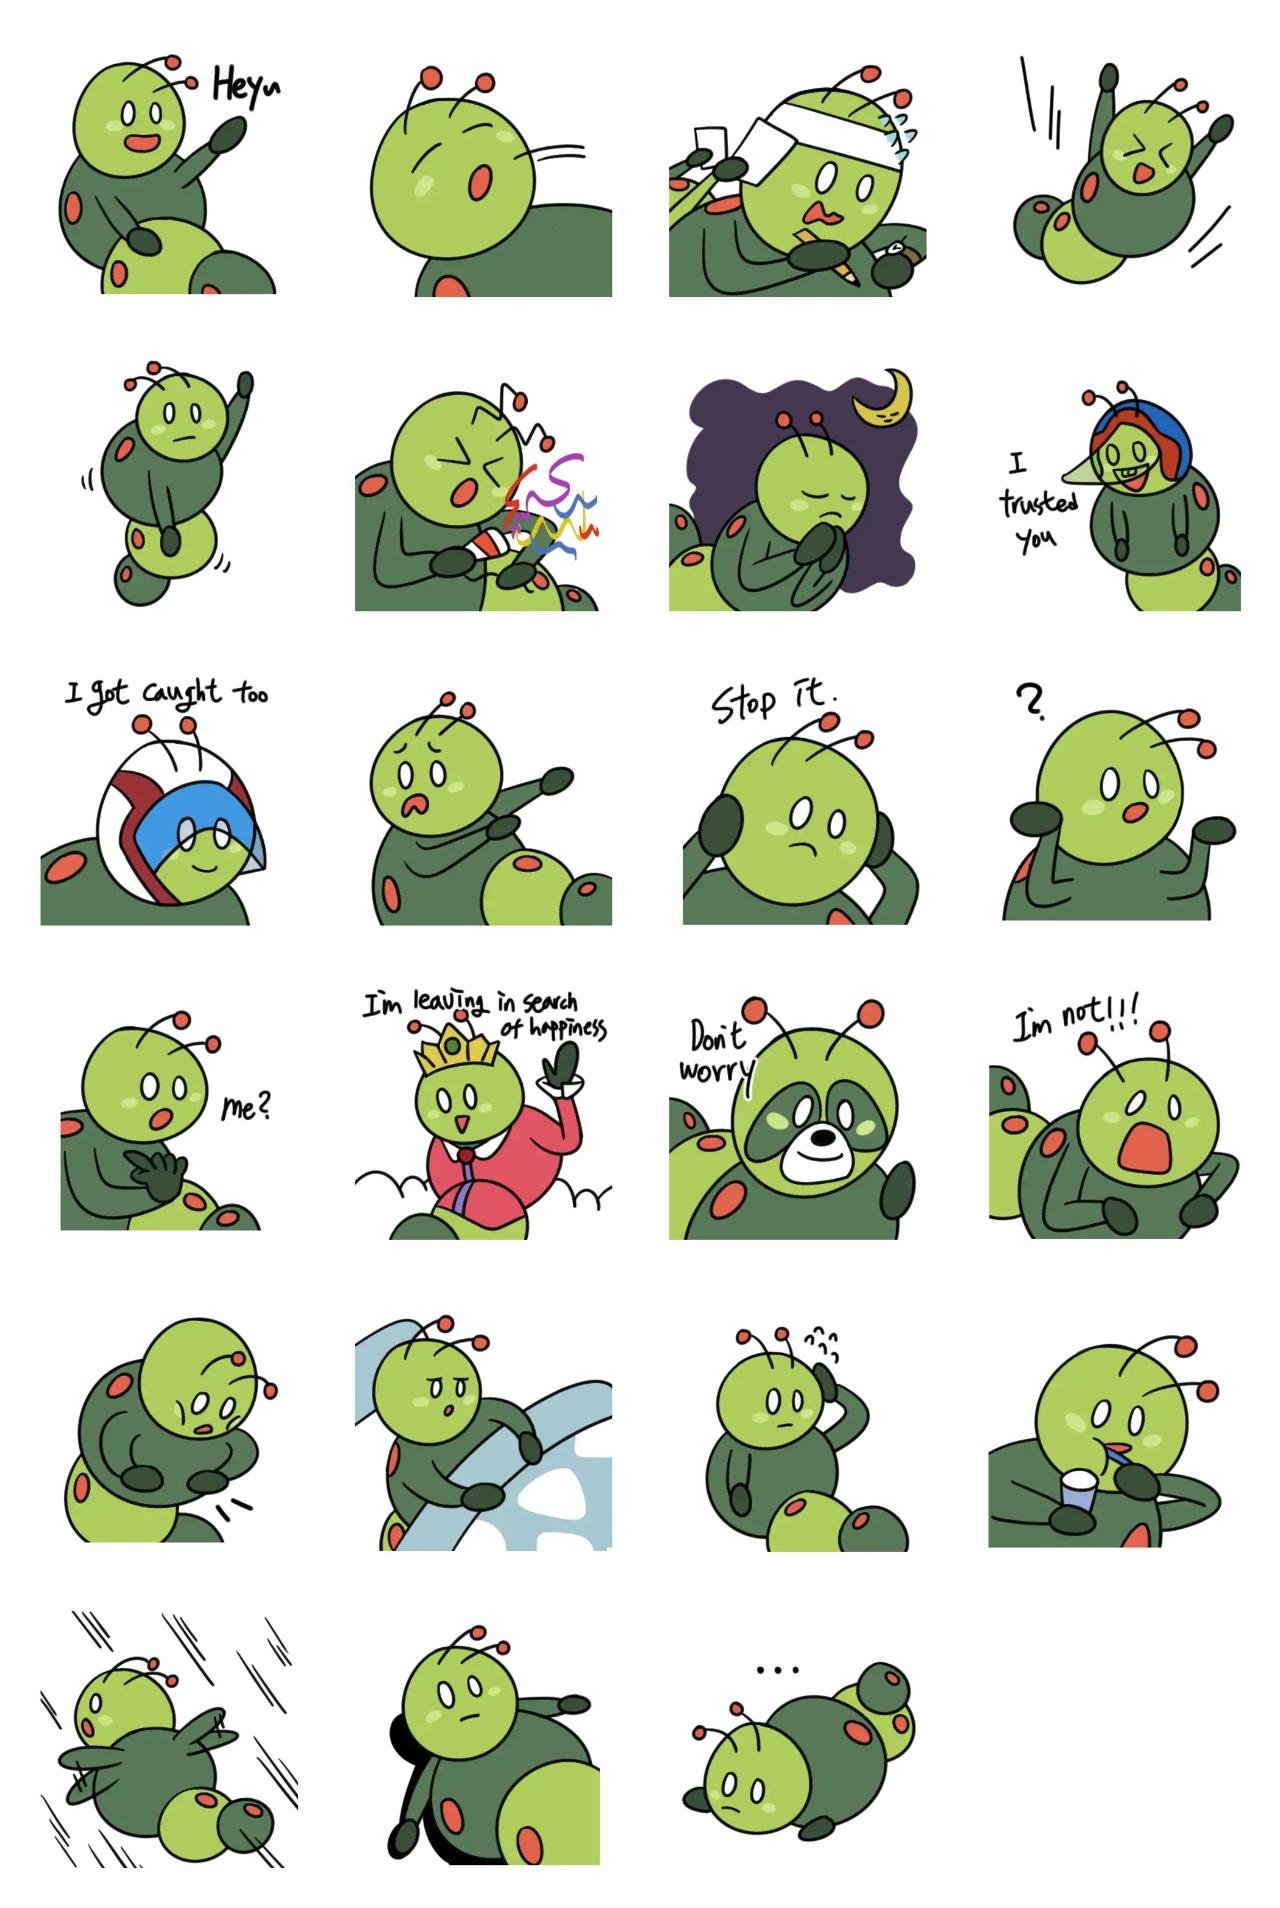 Green buggy Animals sticker pack for Whatsapp, Telegram, Signal, and others chatting and message apps